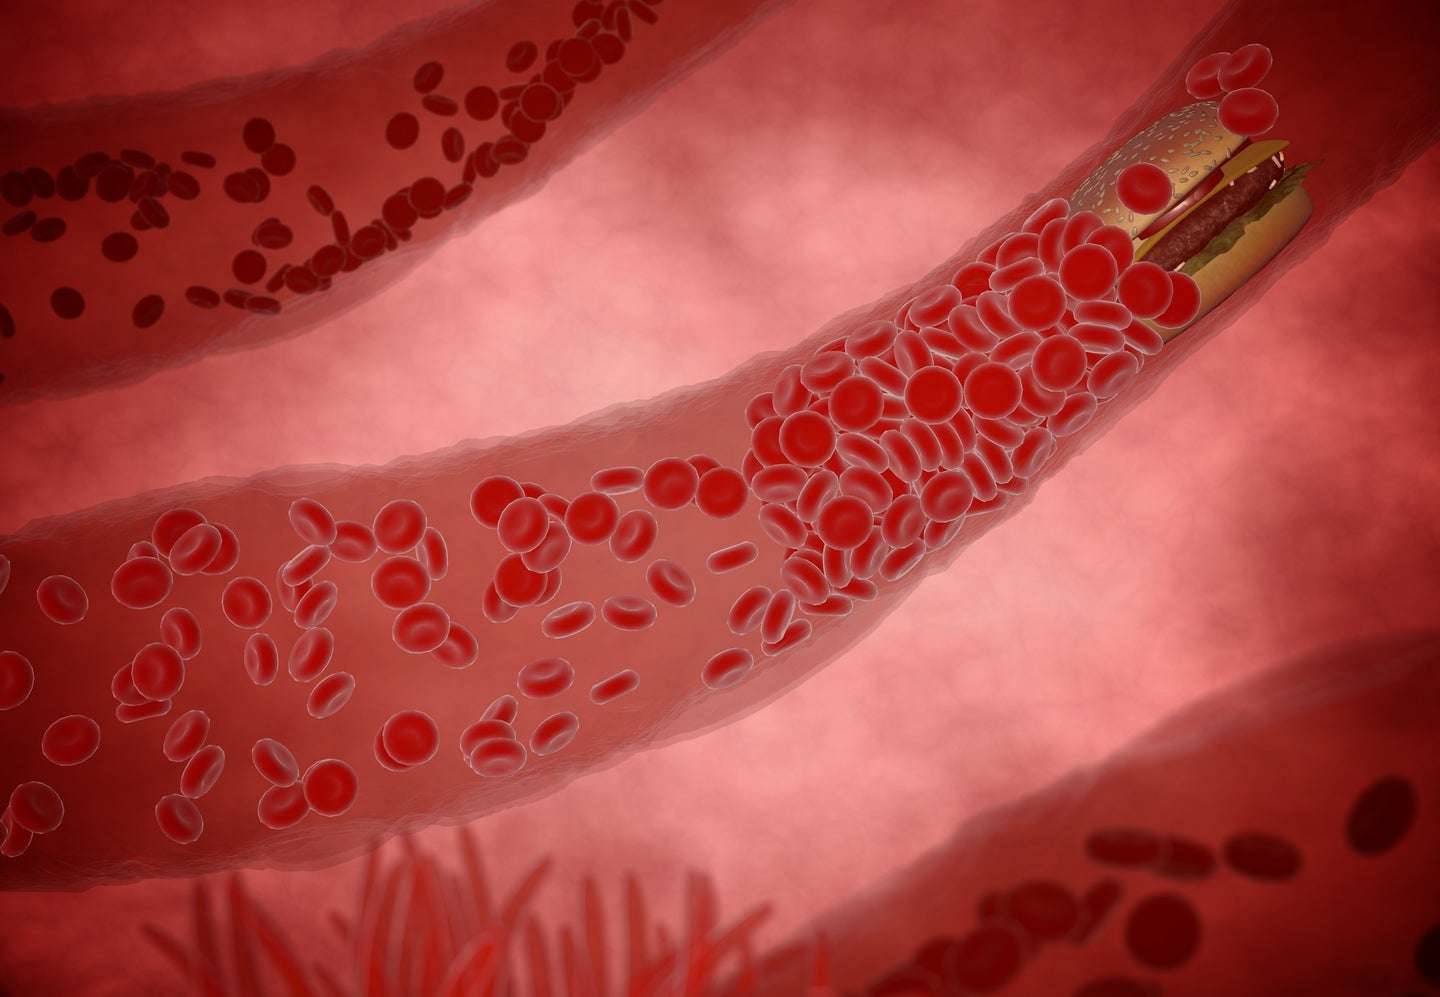 Arteries with red blood cells flowing through and a yellowish cholesterol clog in a medical illustration